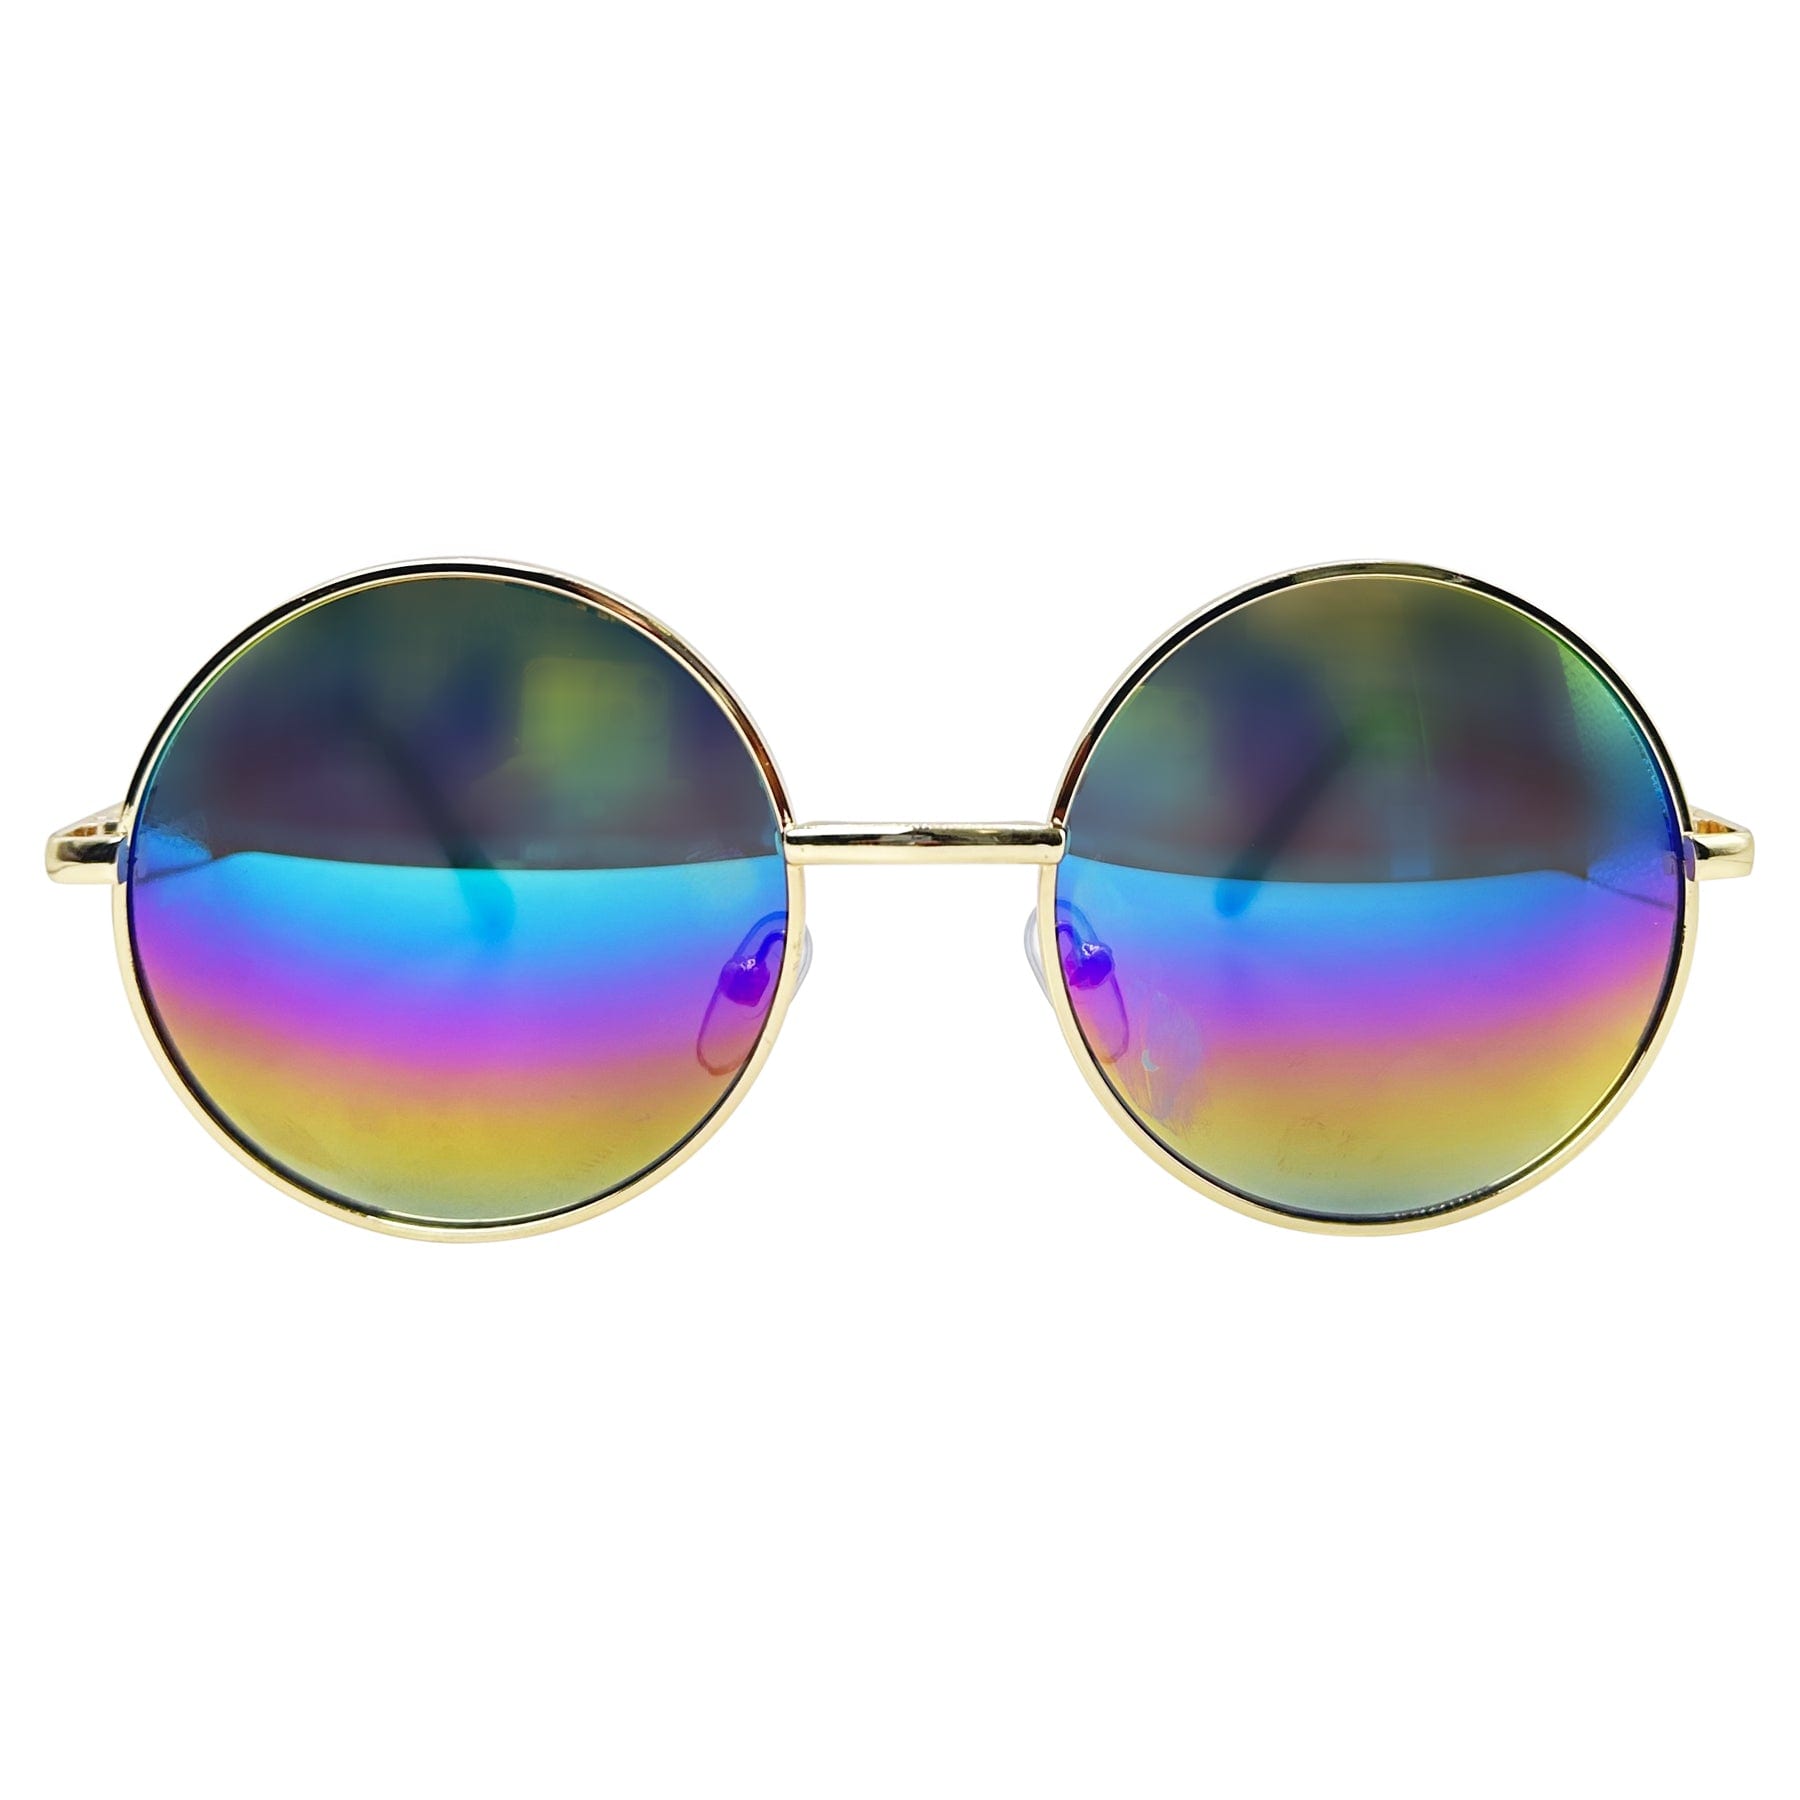 vintage sunglasses with a rainbow mirrored lens and gold frame